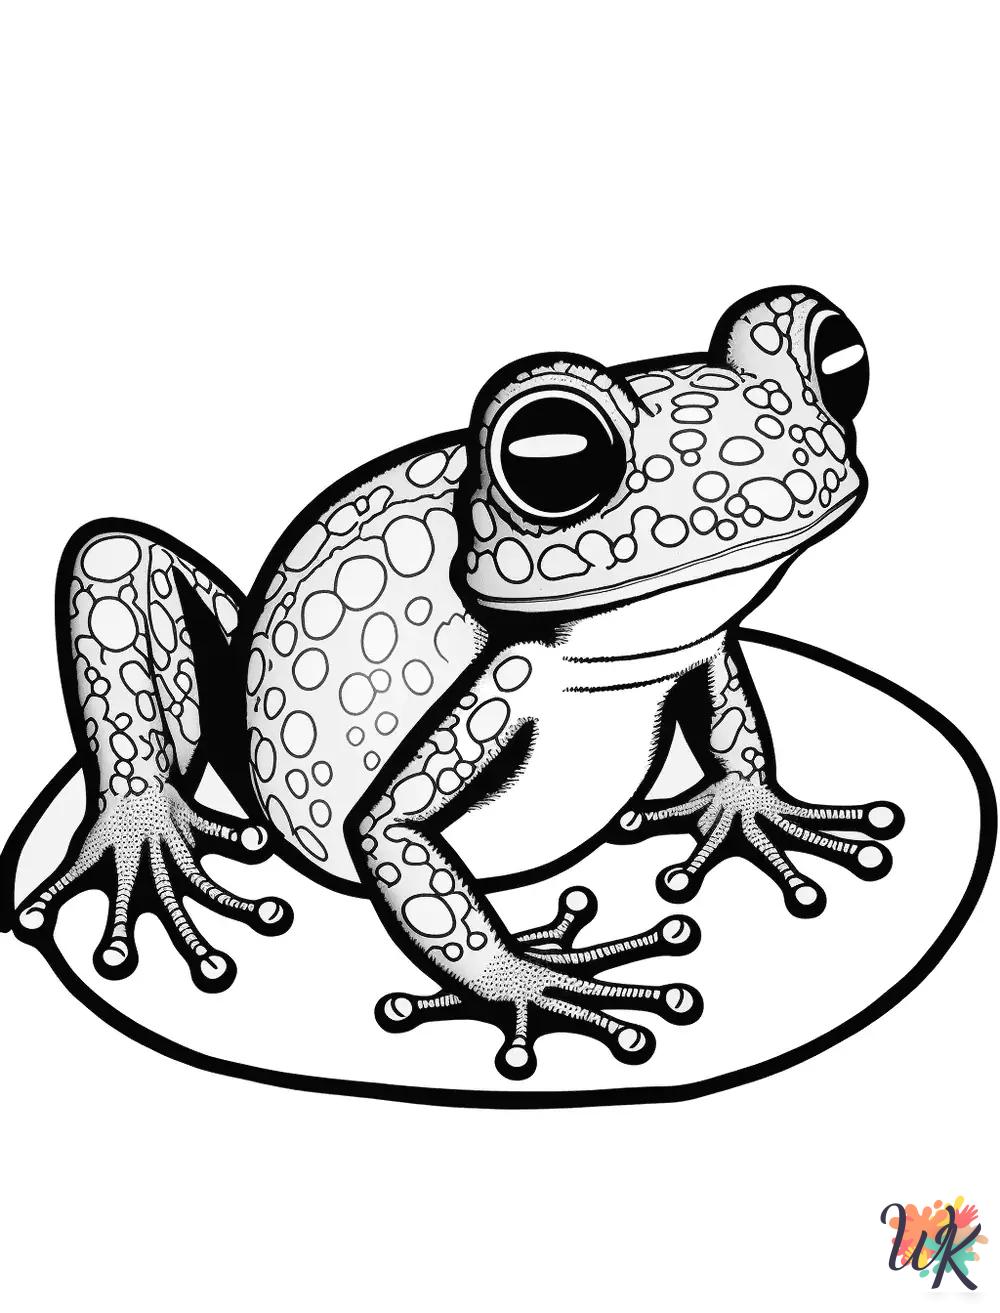 Frog coloring pages free